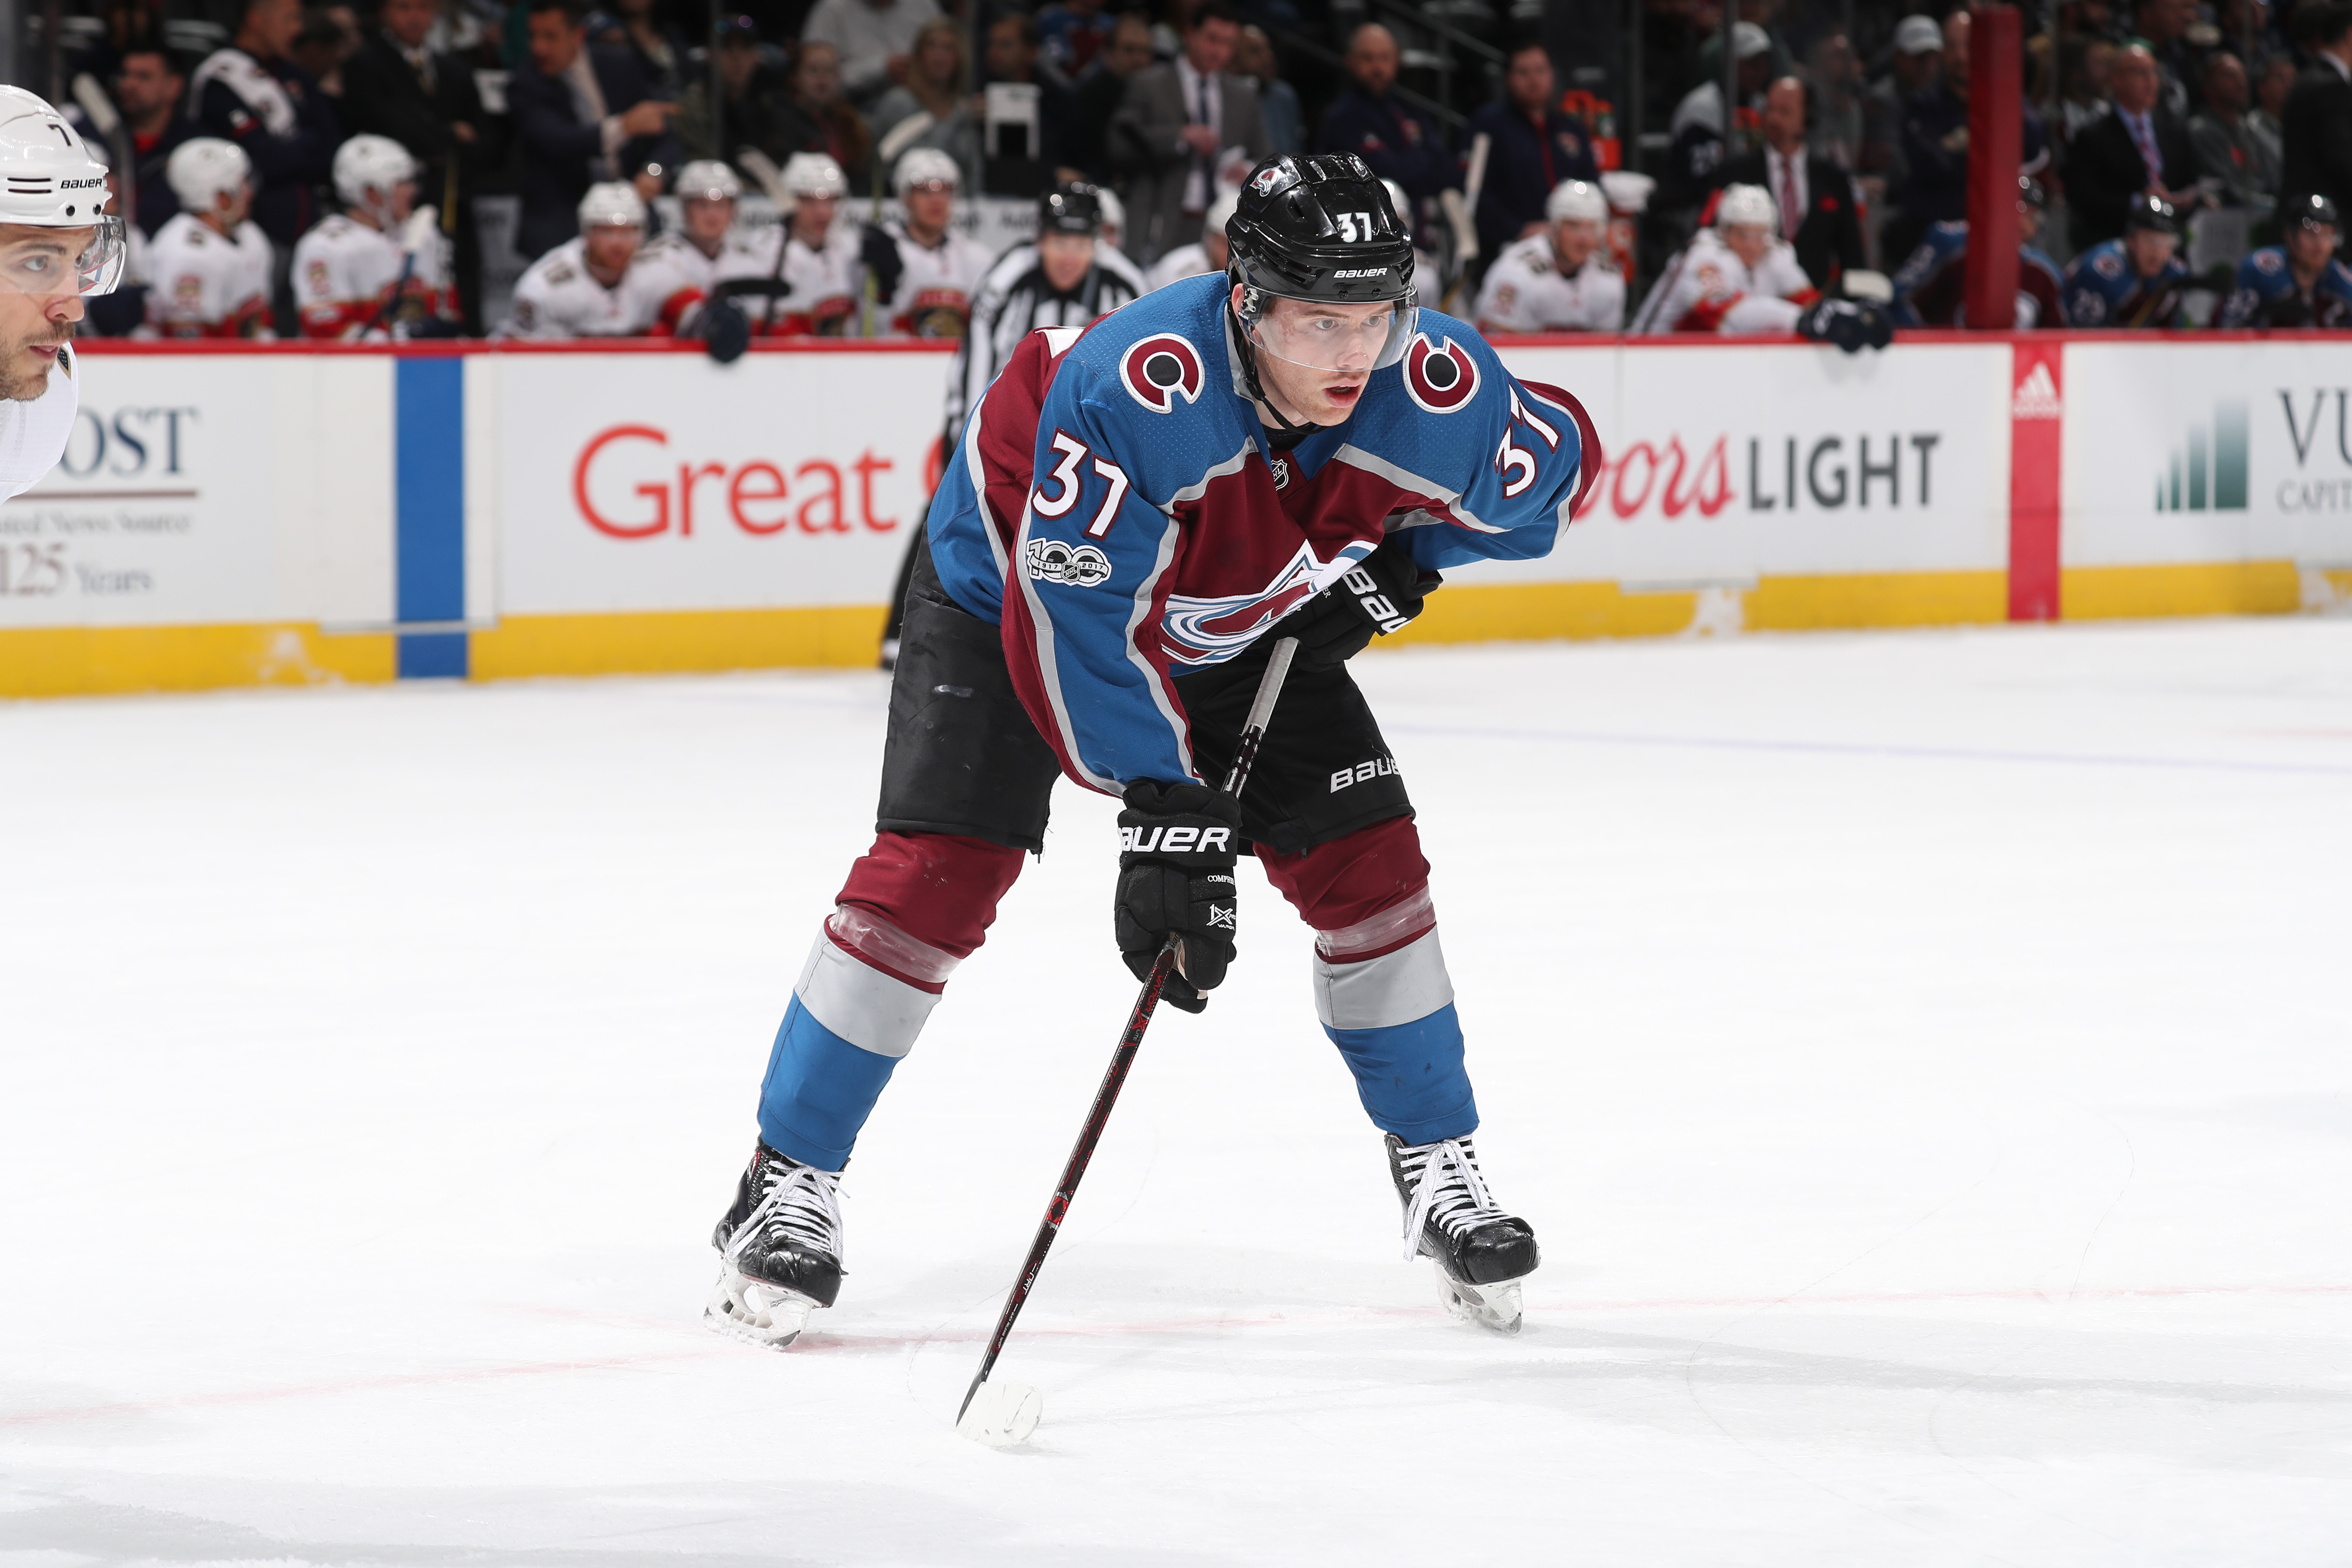 Why the Devon Toews trade was such a steal for Joe Sakic